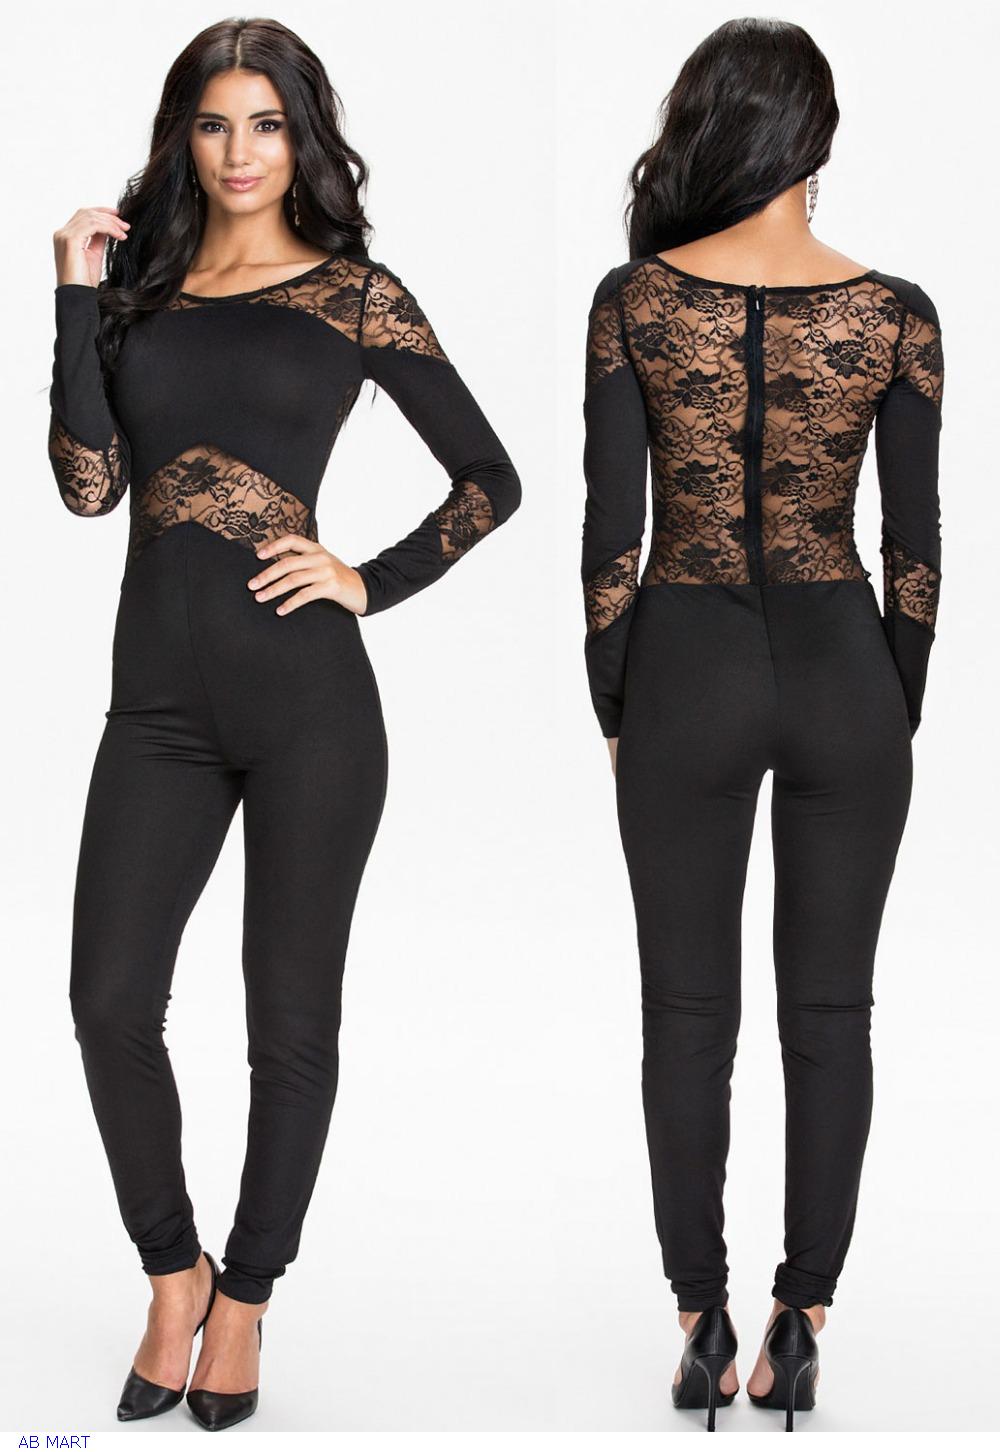 Black Lace Insert Hollow-out Fashion Long sleeve j...